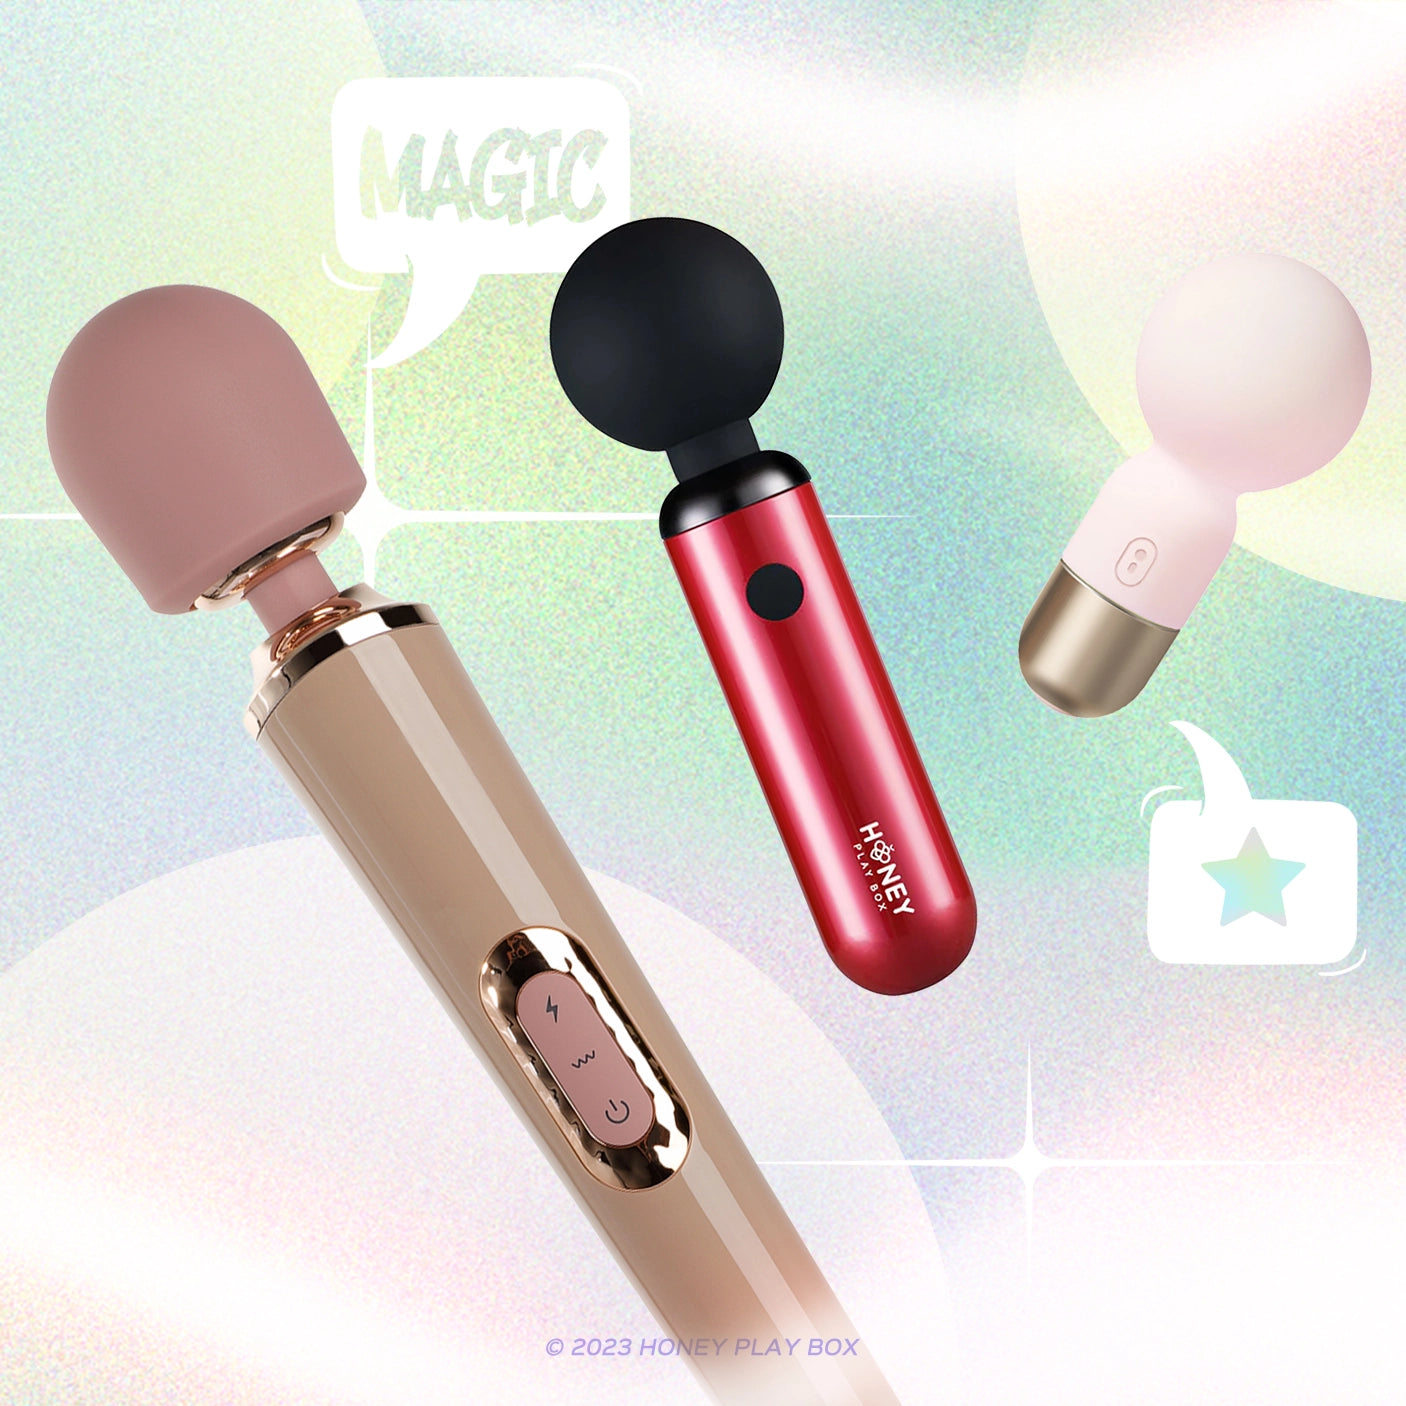 HOW TO GET THE MAGIC OUT OF A WAND VIBRATOR - THE ULTIMATE GUIDE